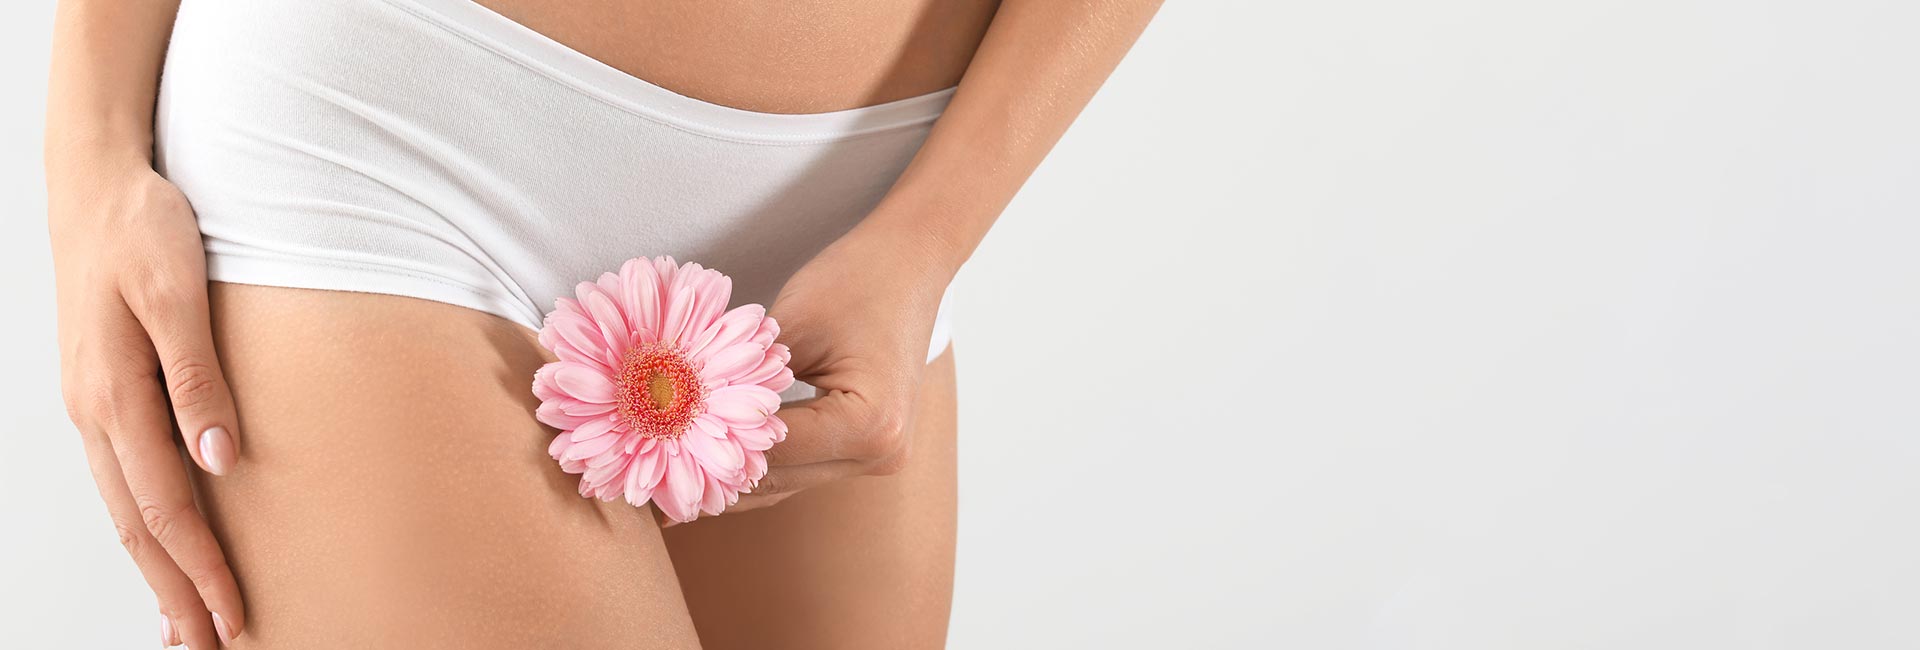 Treatment for Vaginal Dryness and Painful Sex